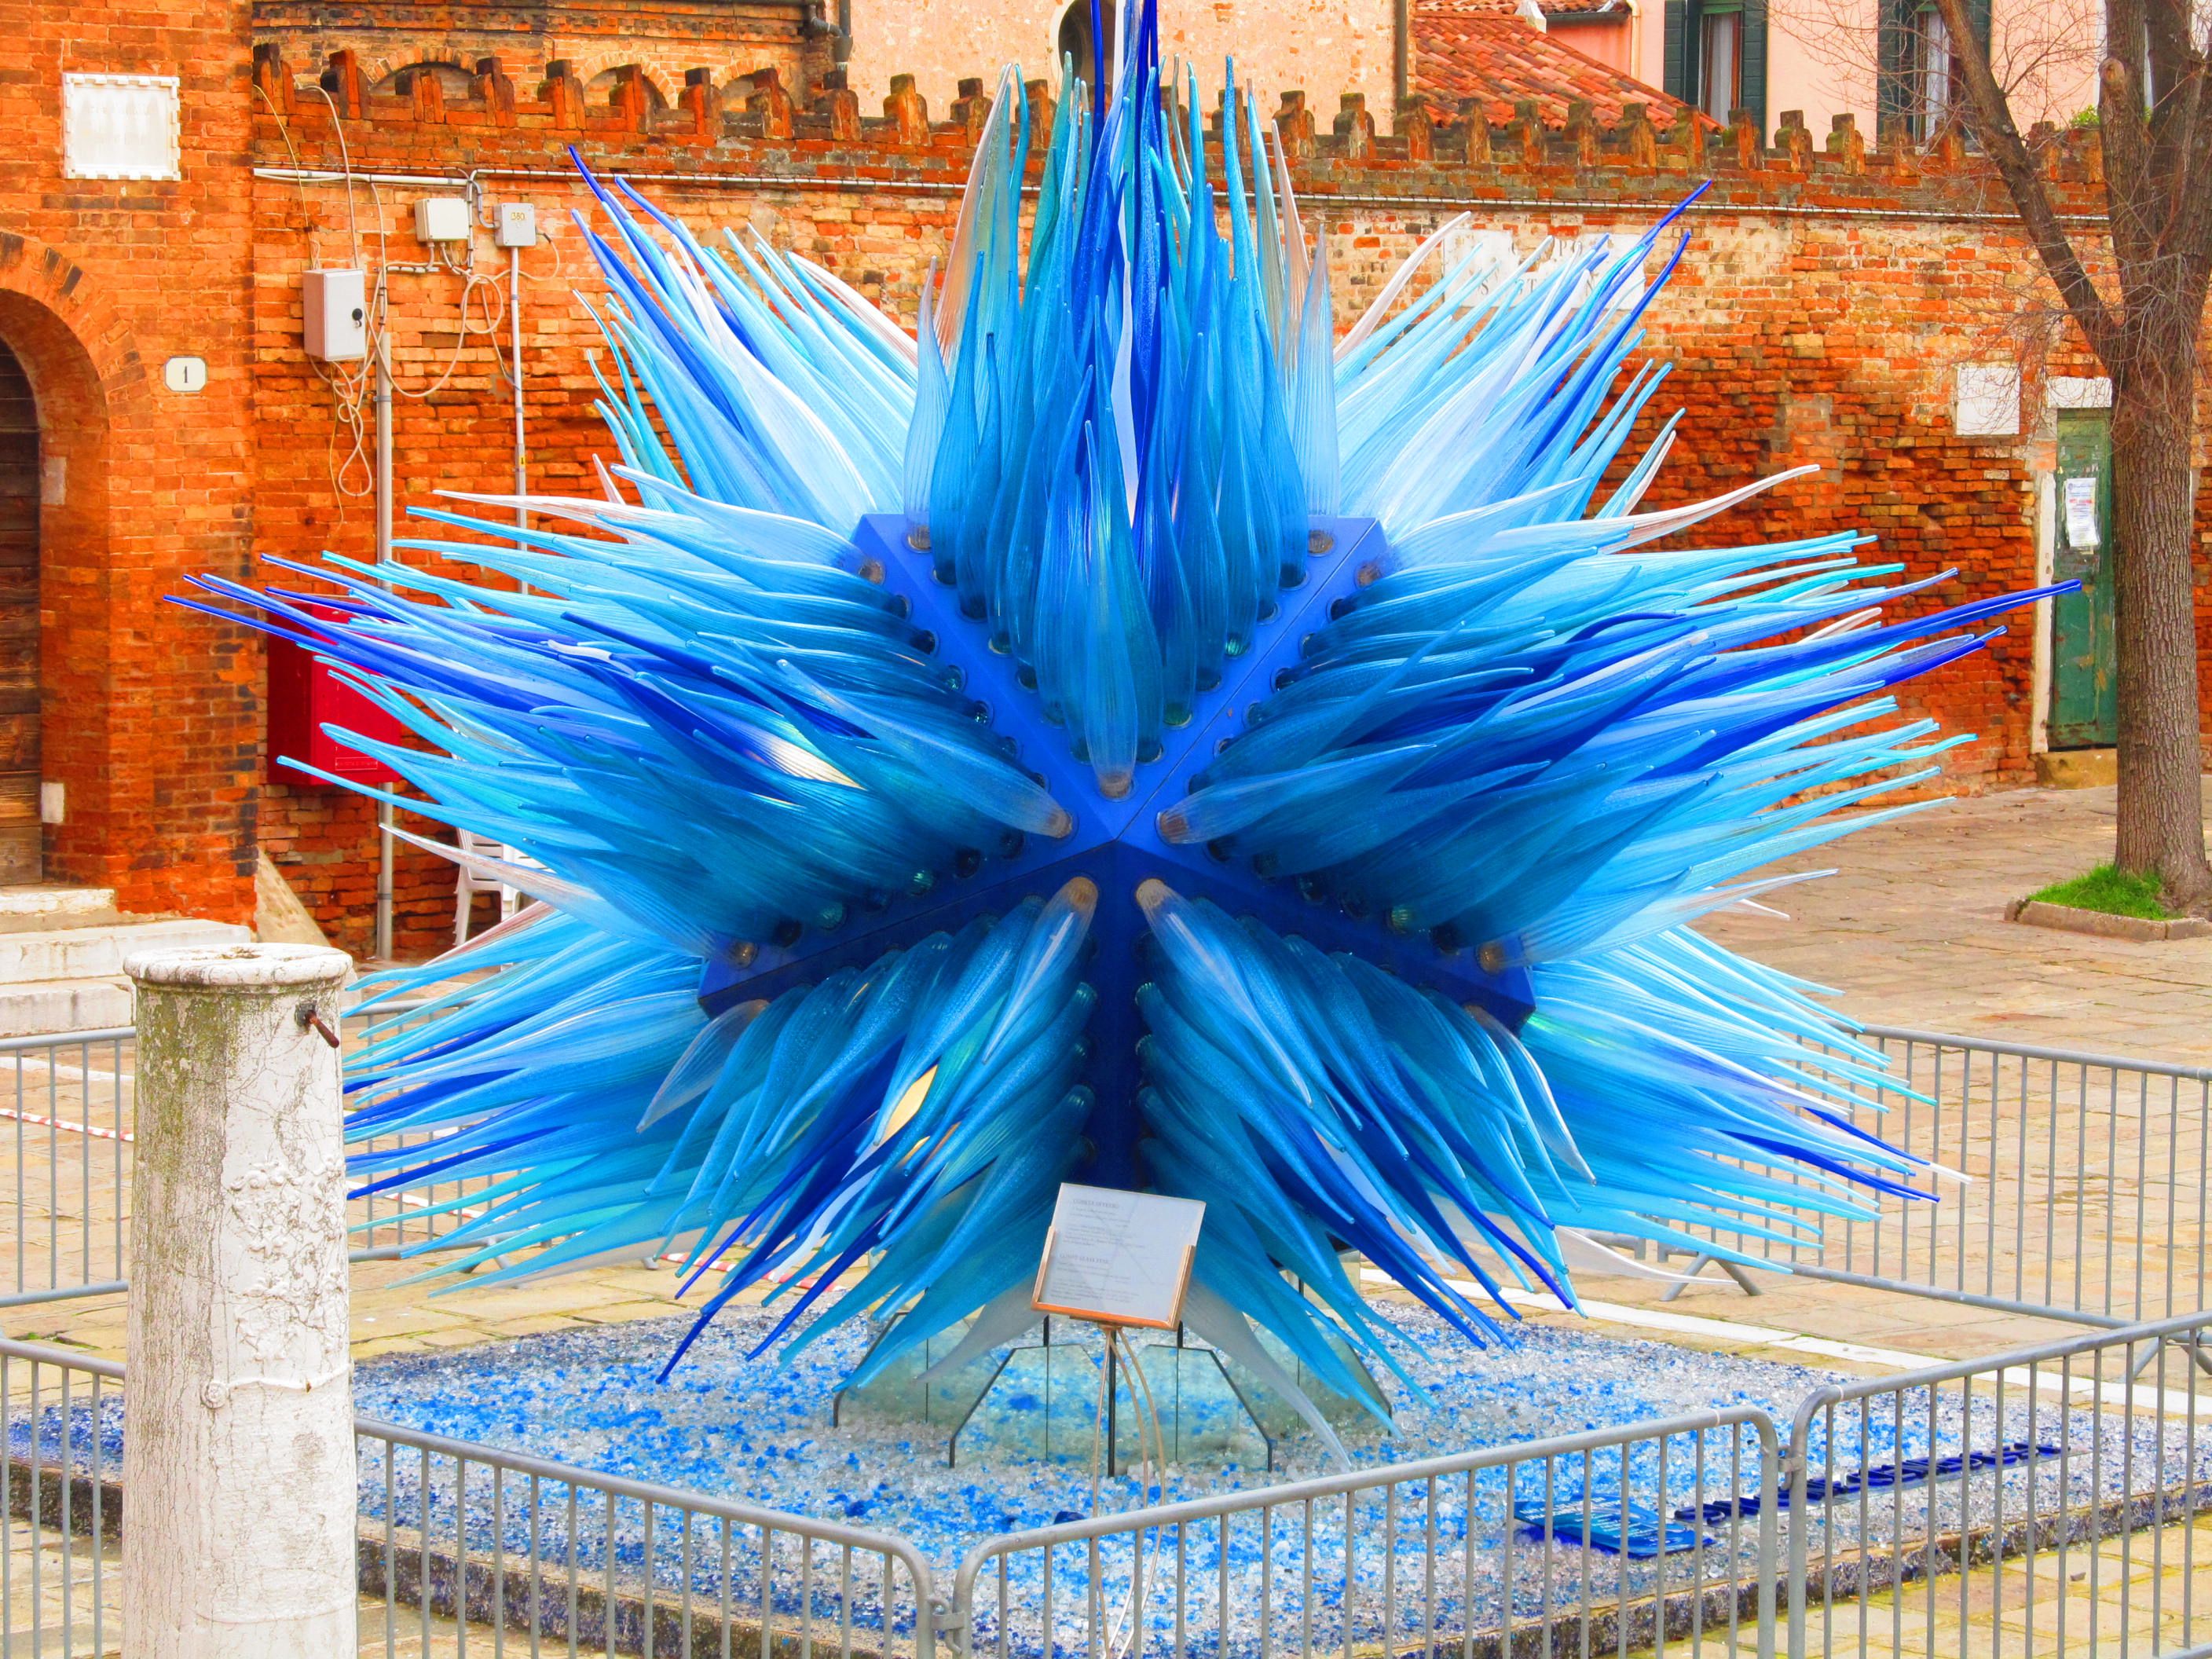 Events in the Island of Murano